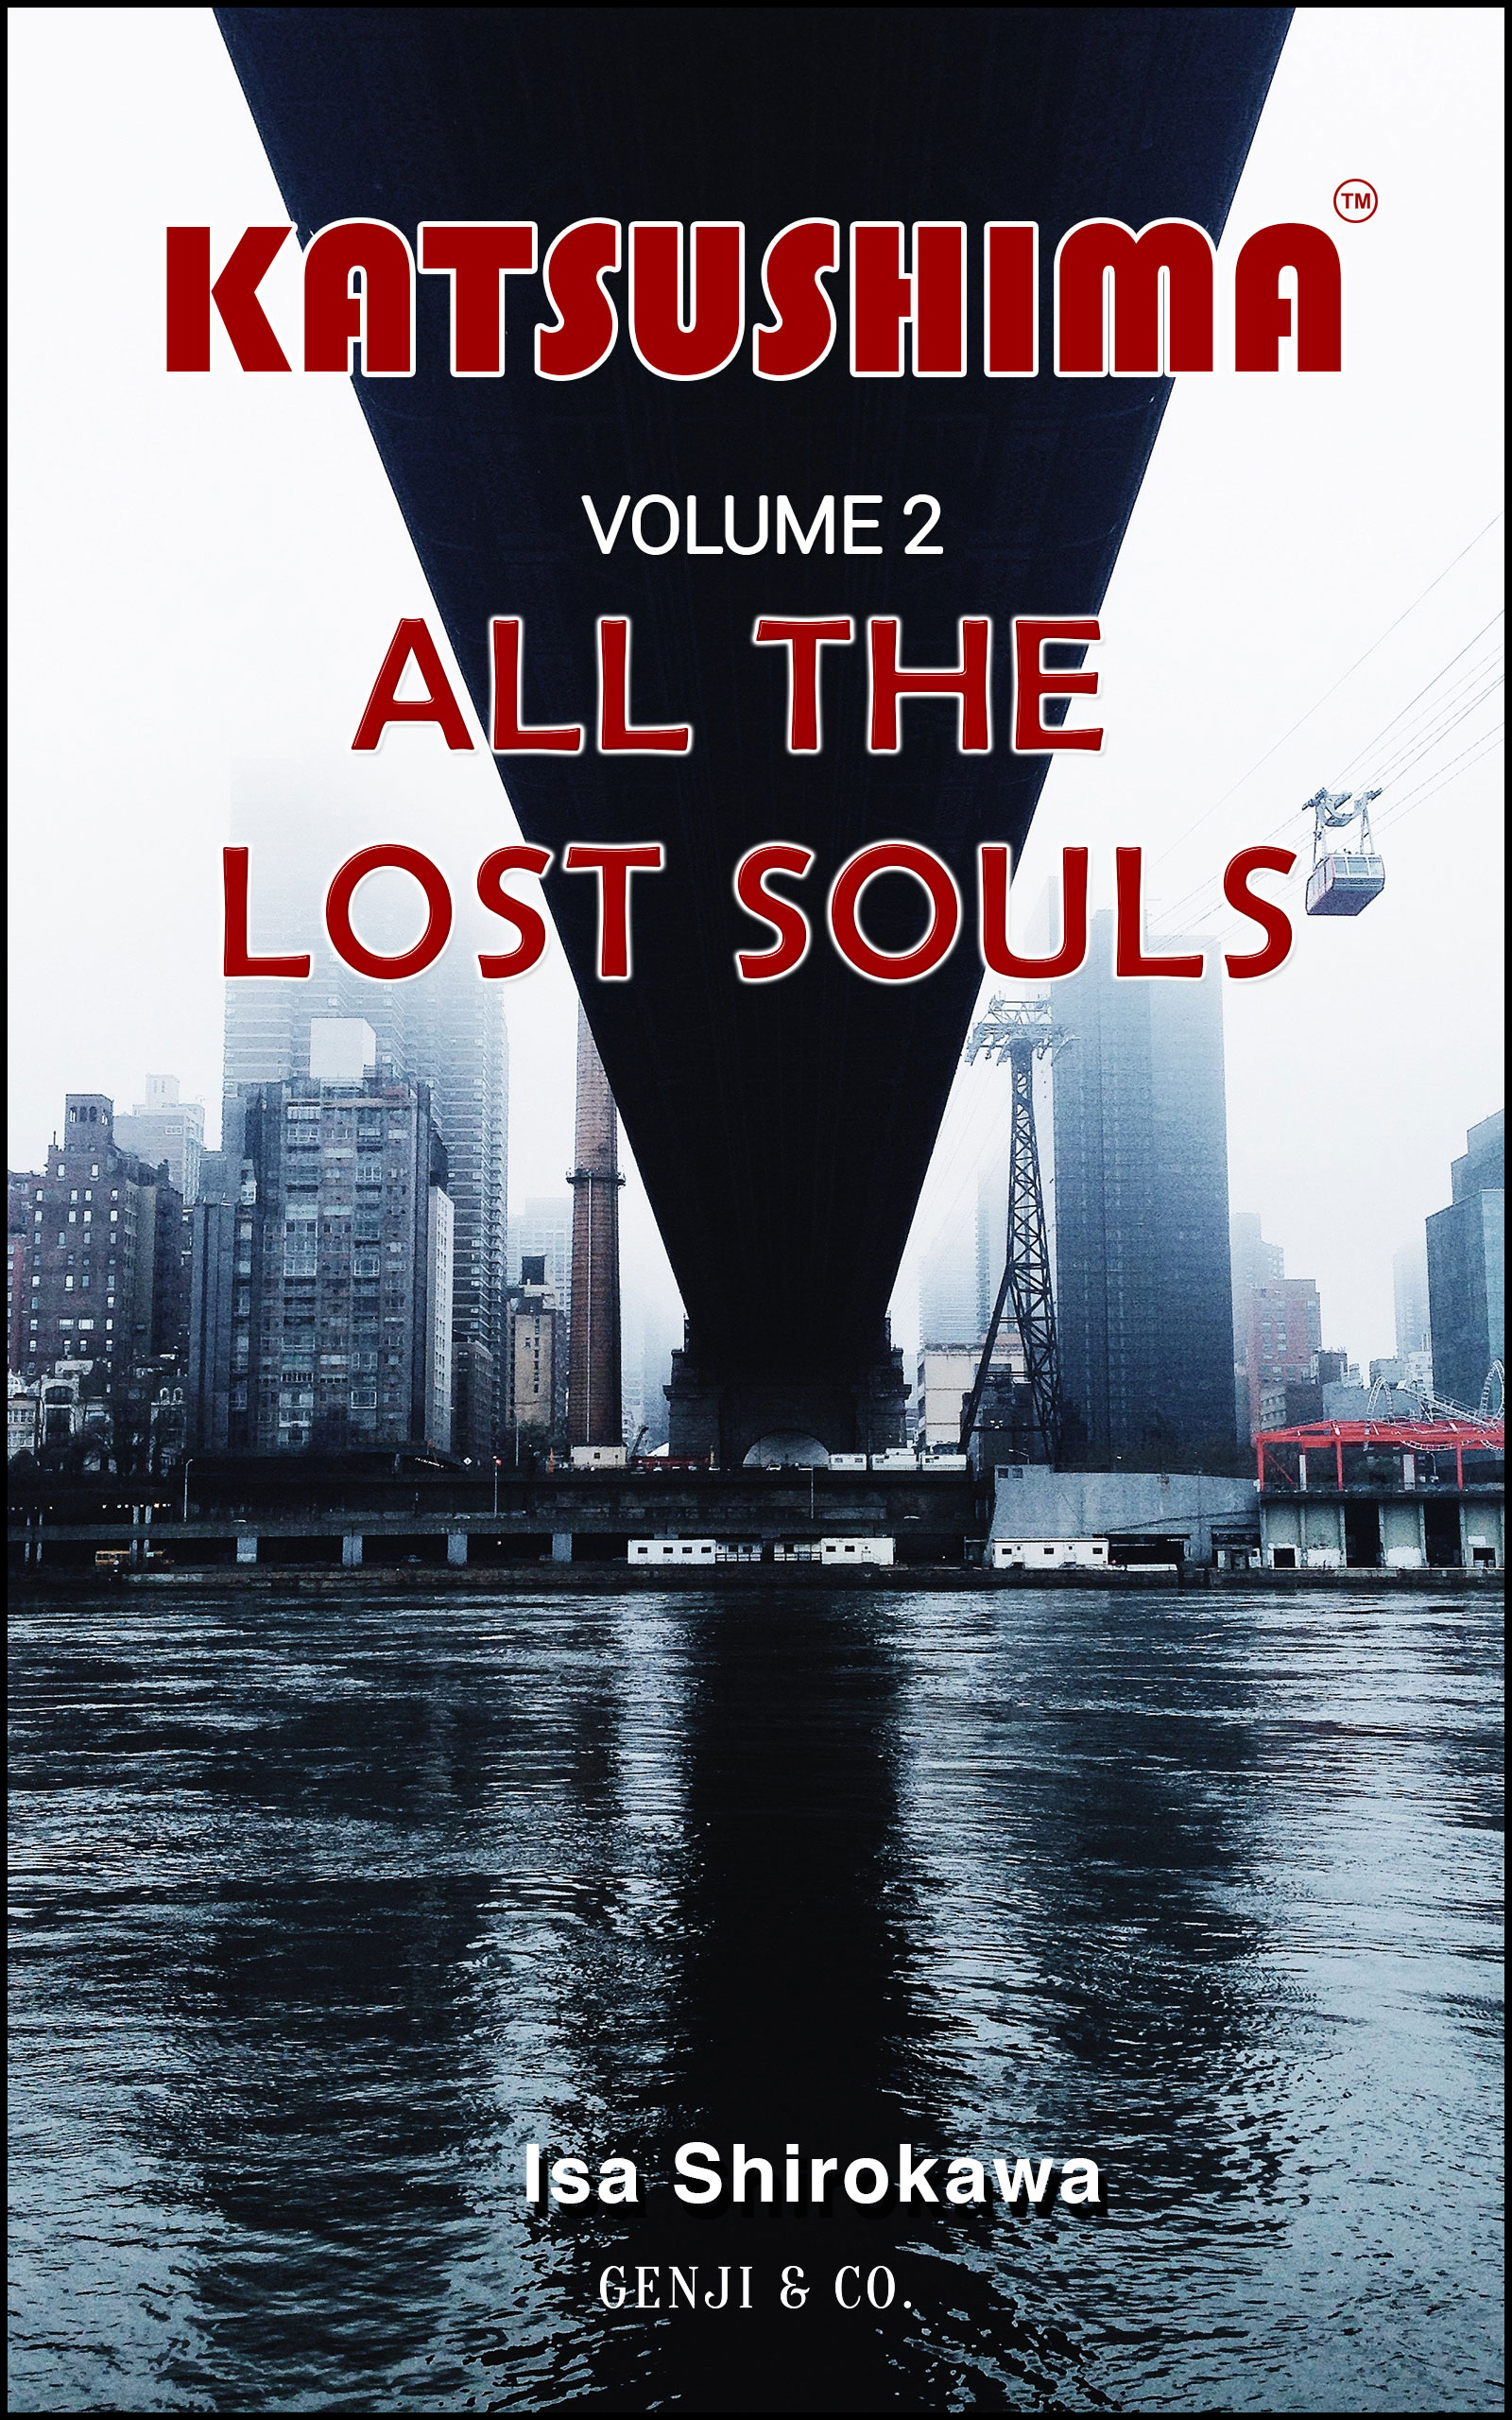 Katsushima - Volume 2 All the lost souls Book cover